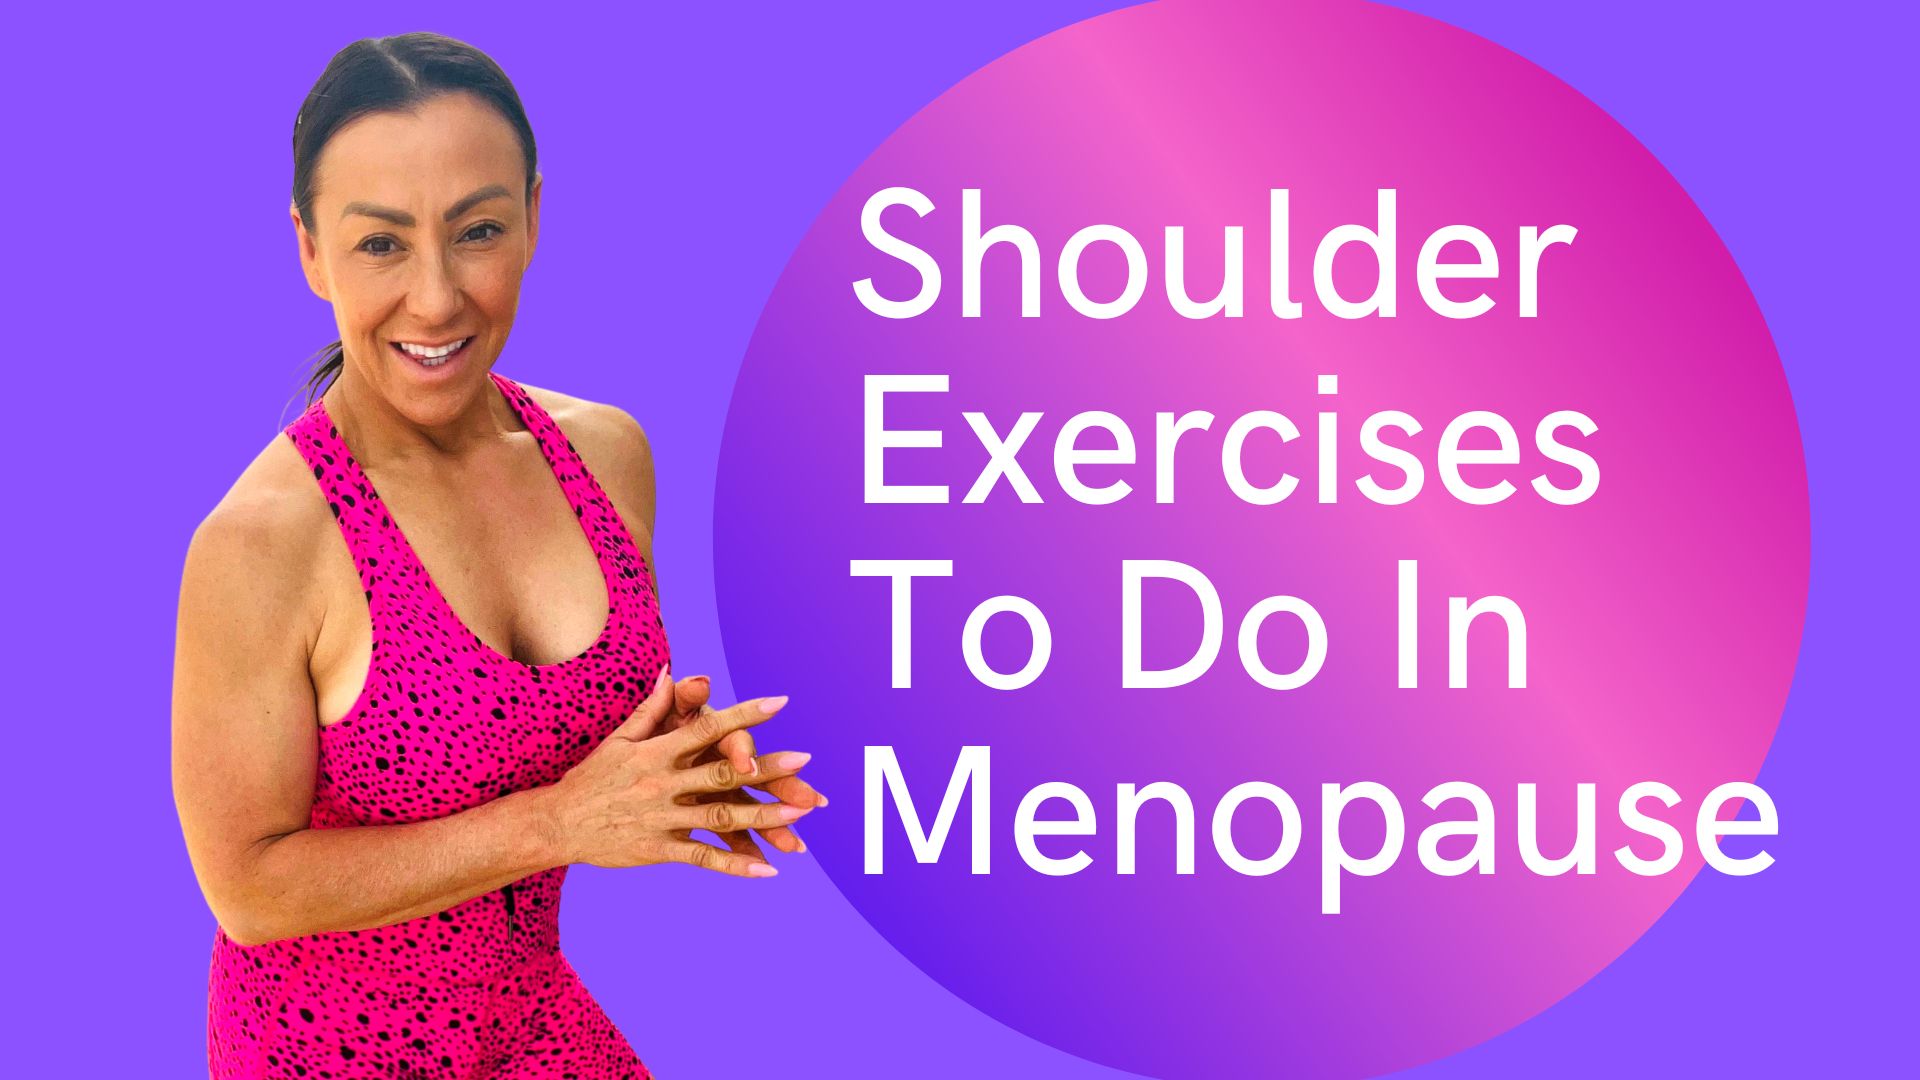 Shoulder Exercises To Do In Menopause